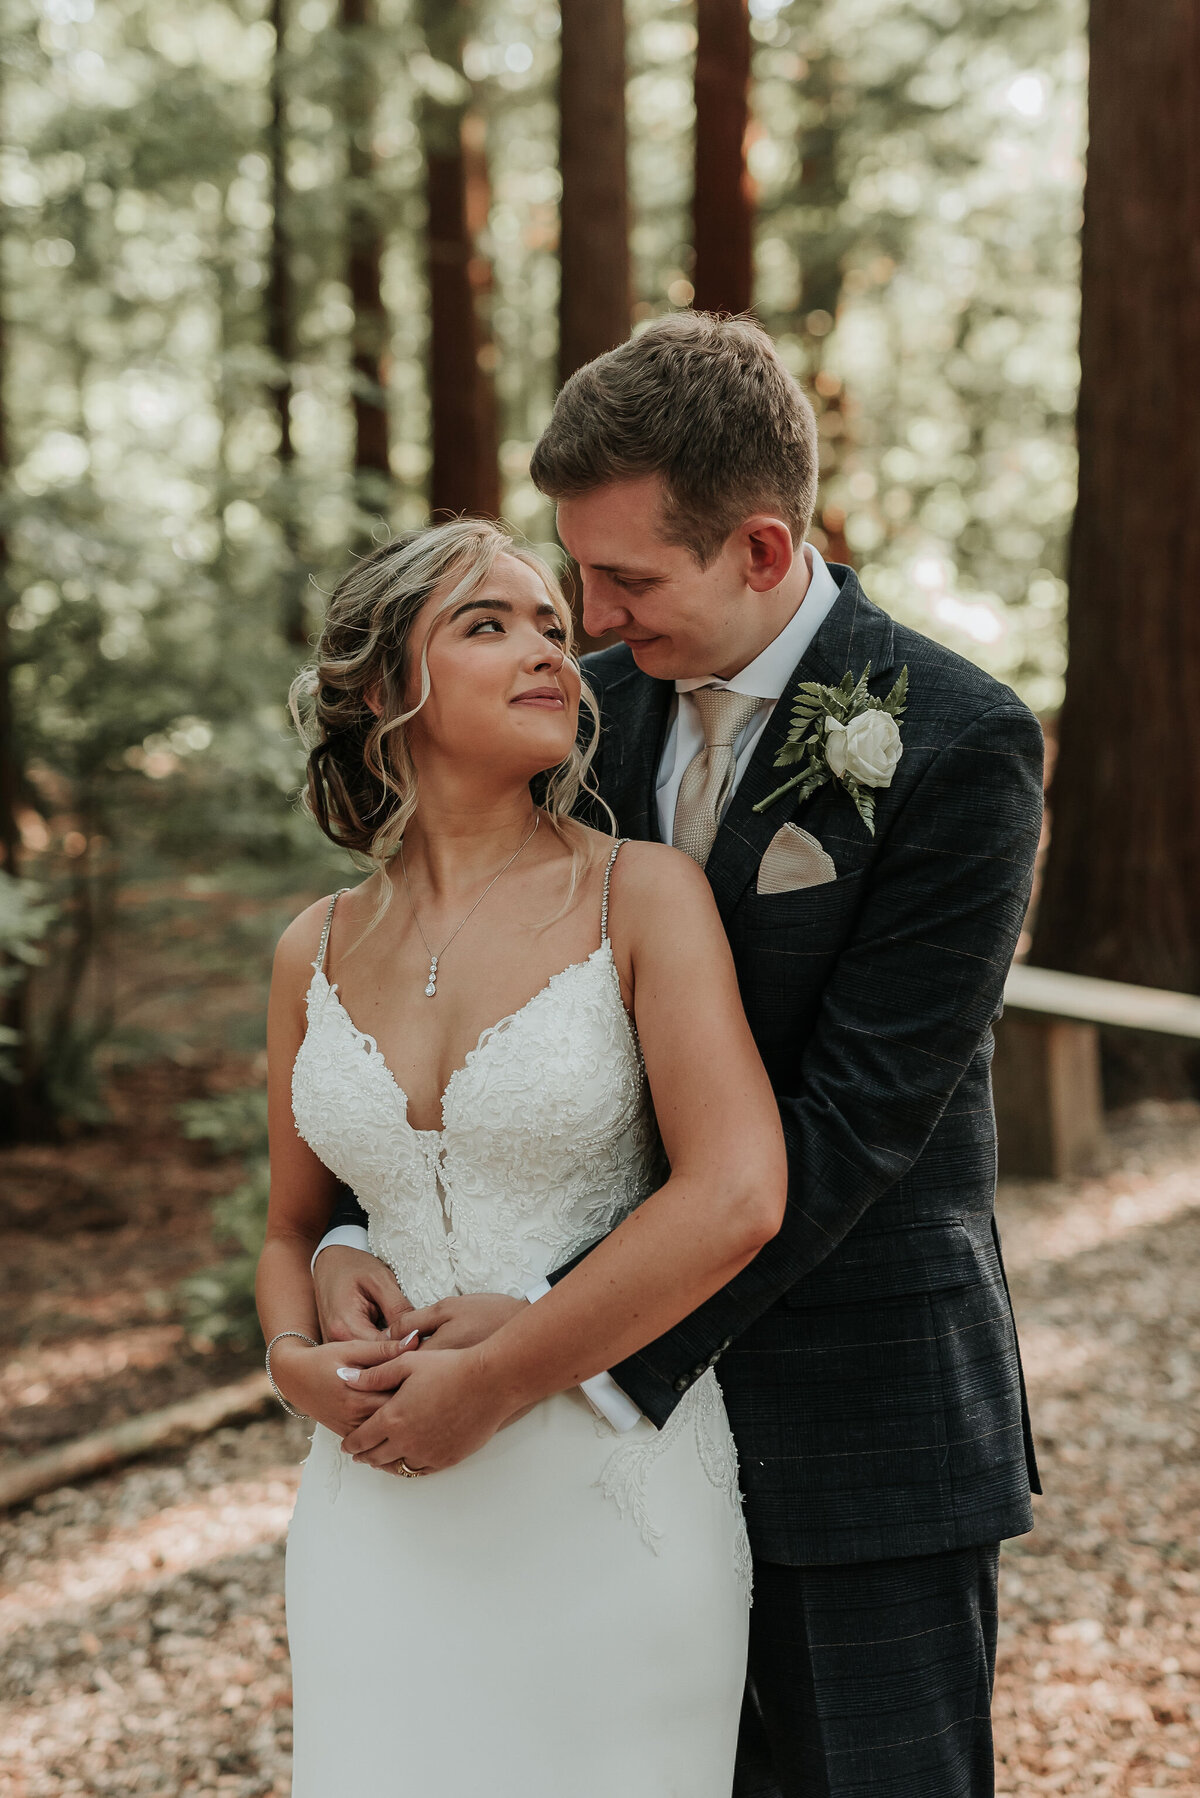 Groom embraces his Bride gently at their outdoor woodland wedding at Two Woods Estate